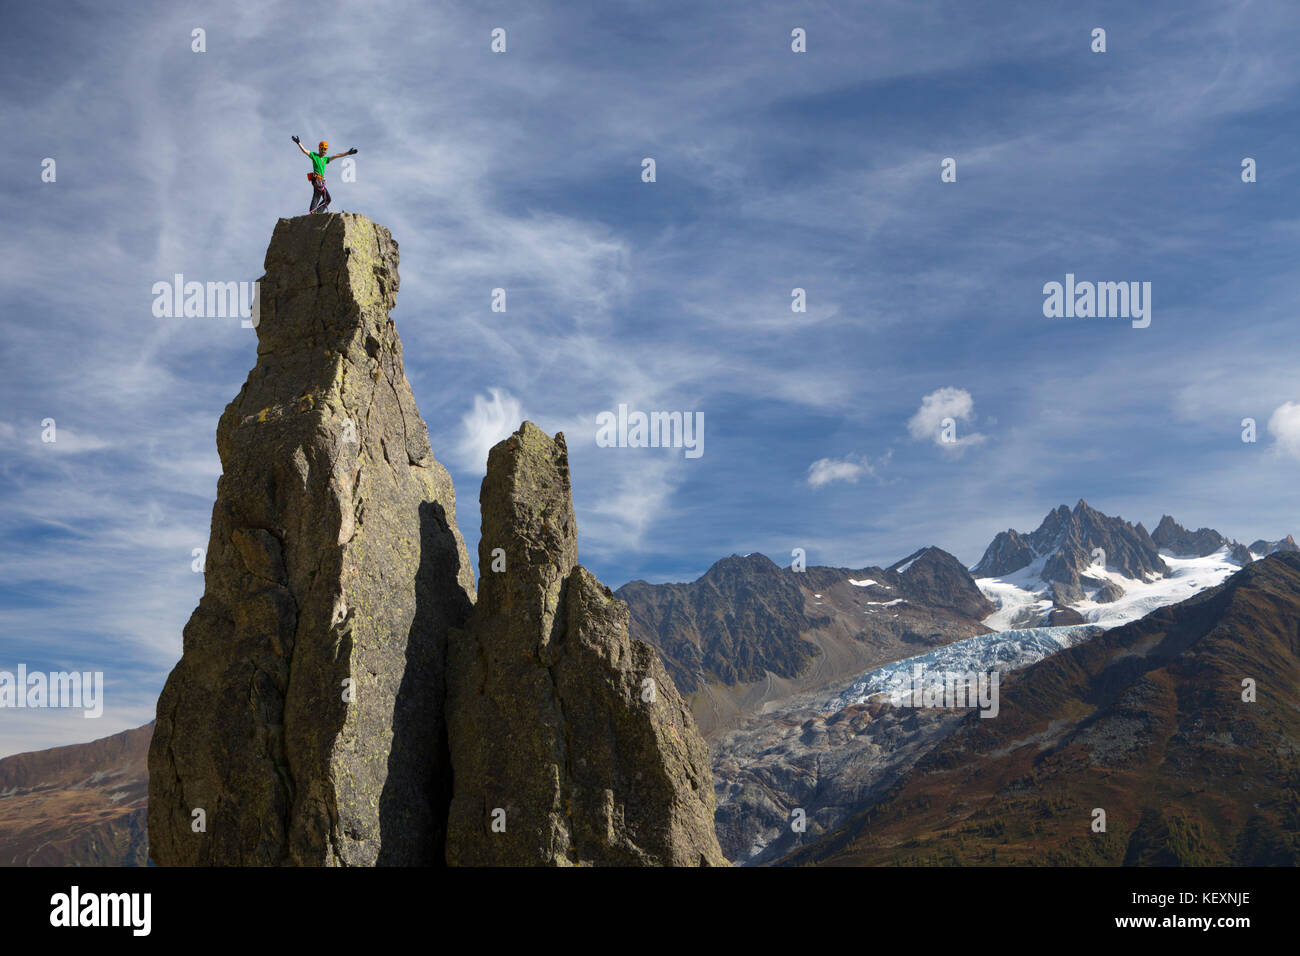 A mountain climber standing on a summit high above Chamonix in the French Alps. The Argentiere glacier is in the background. Stock Photo